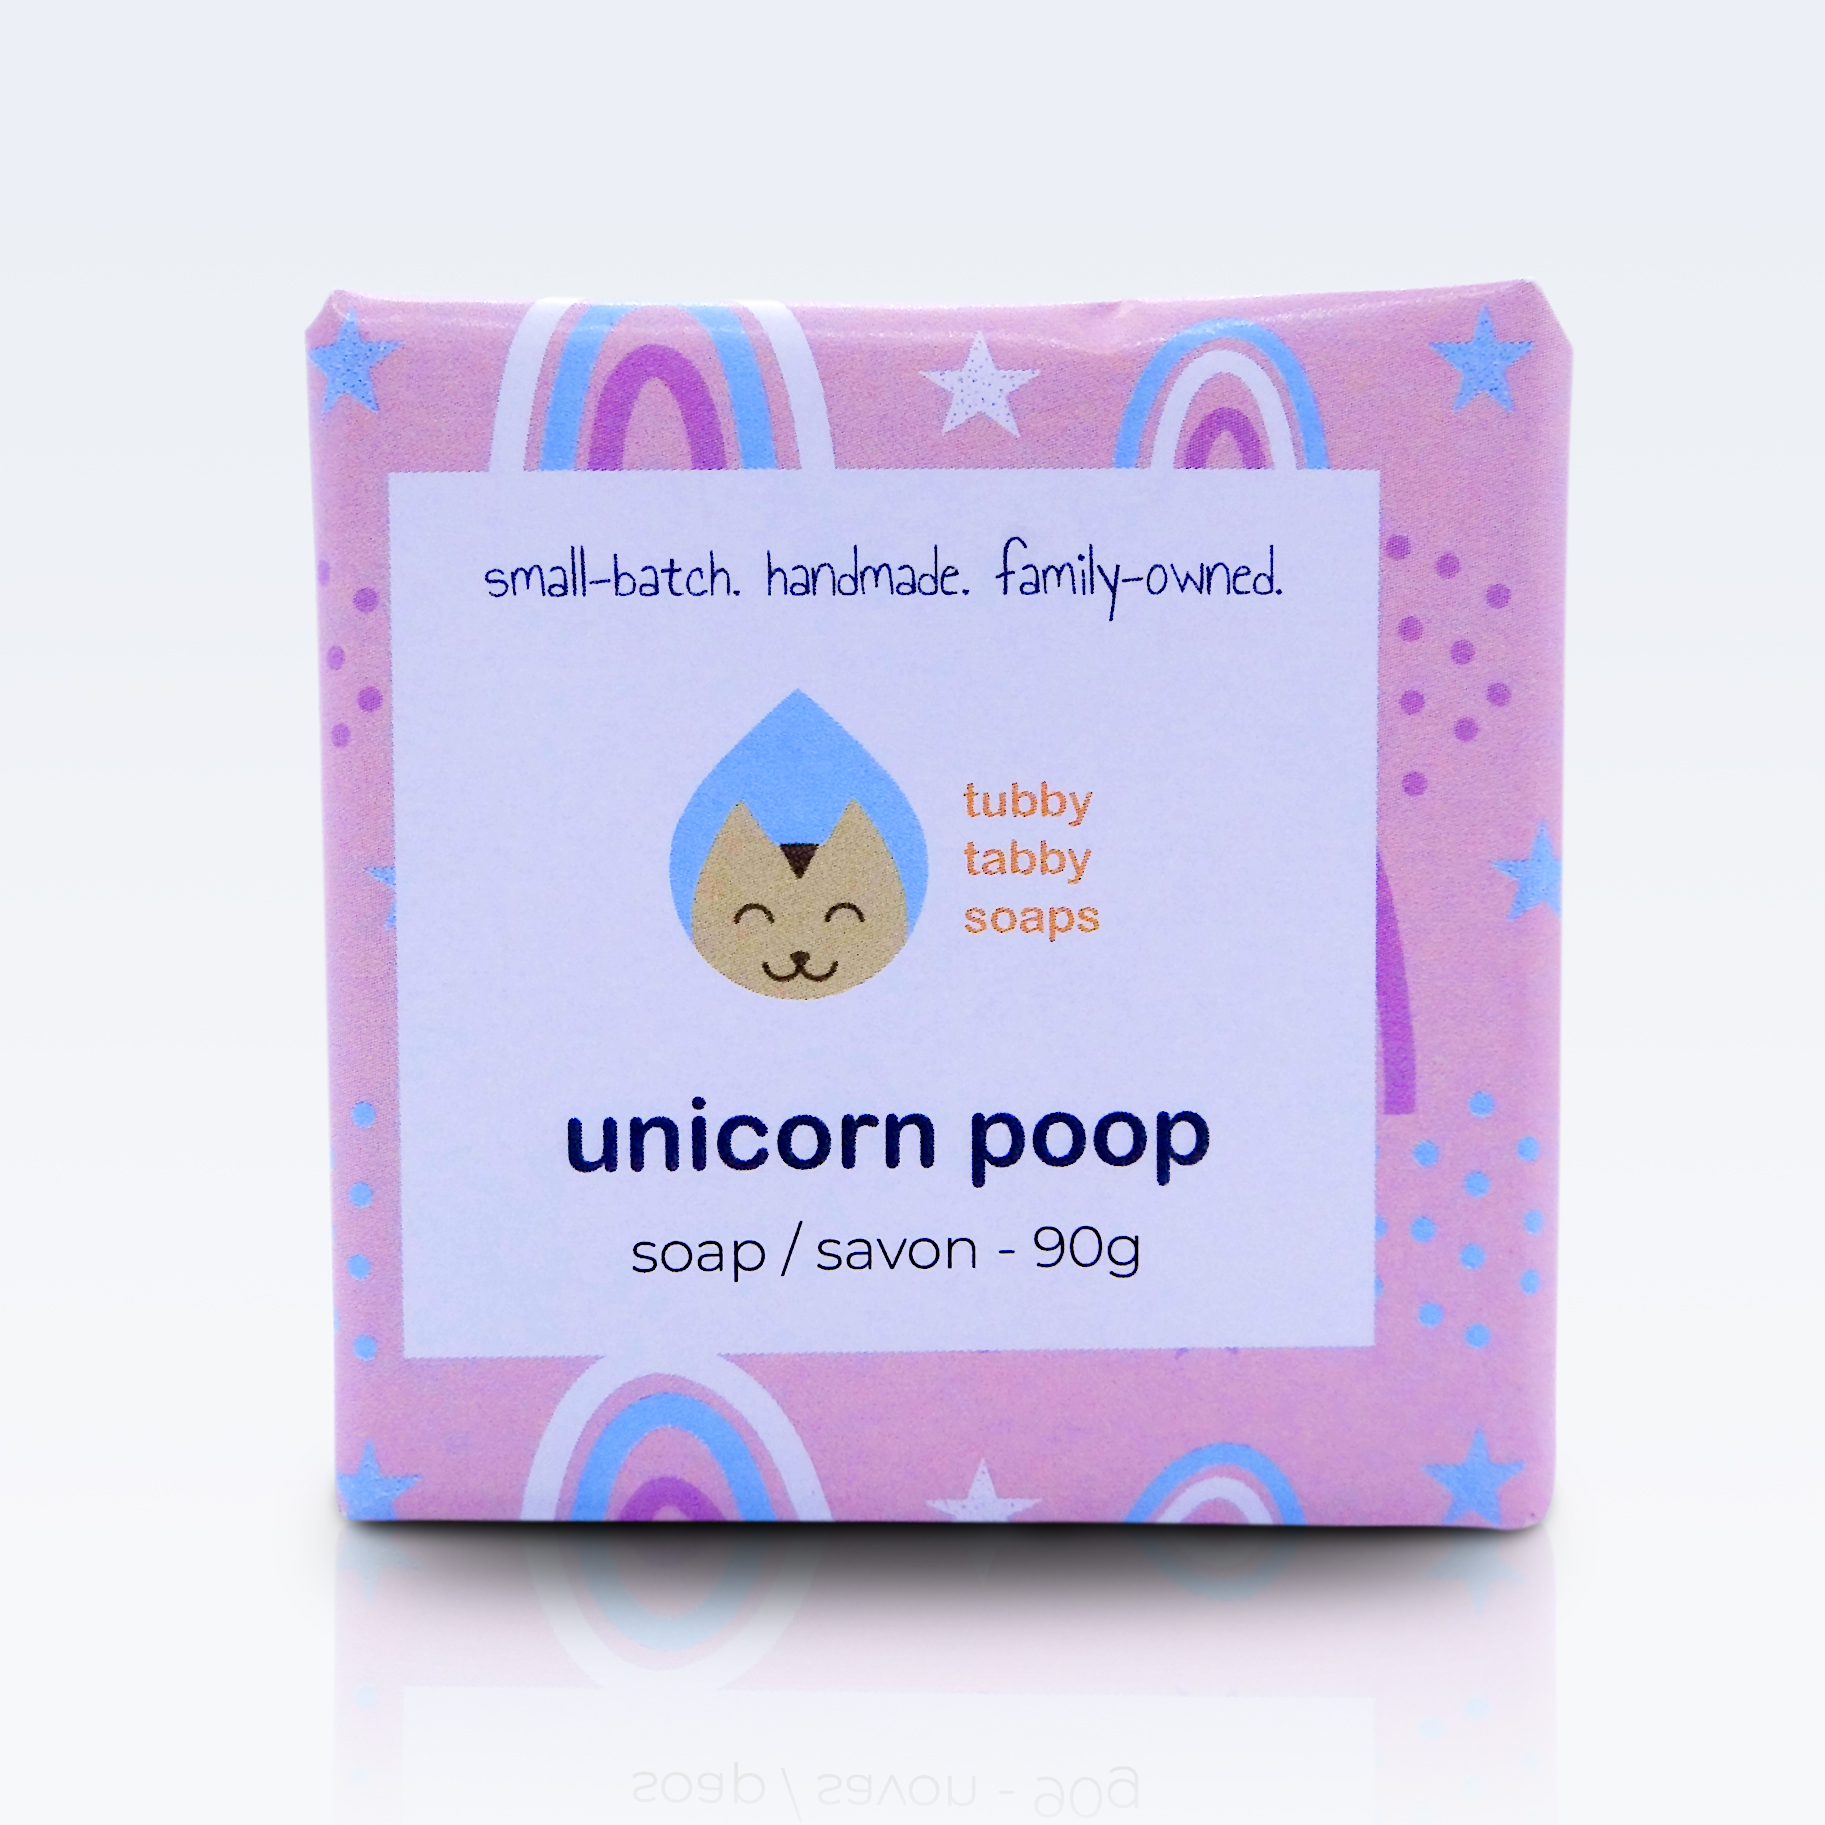 Unicorn Poop handmade kids soap by Tubby Tabby Soaps (bubblegum fragrance, swirled soap with glitter on top)